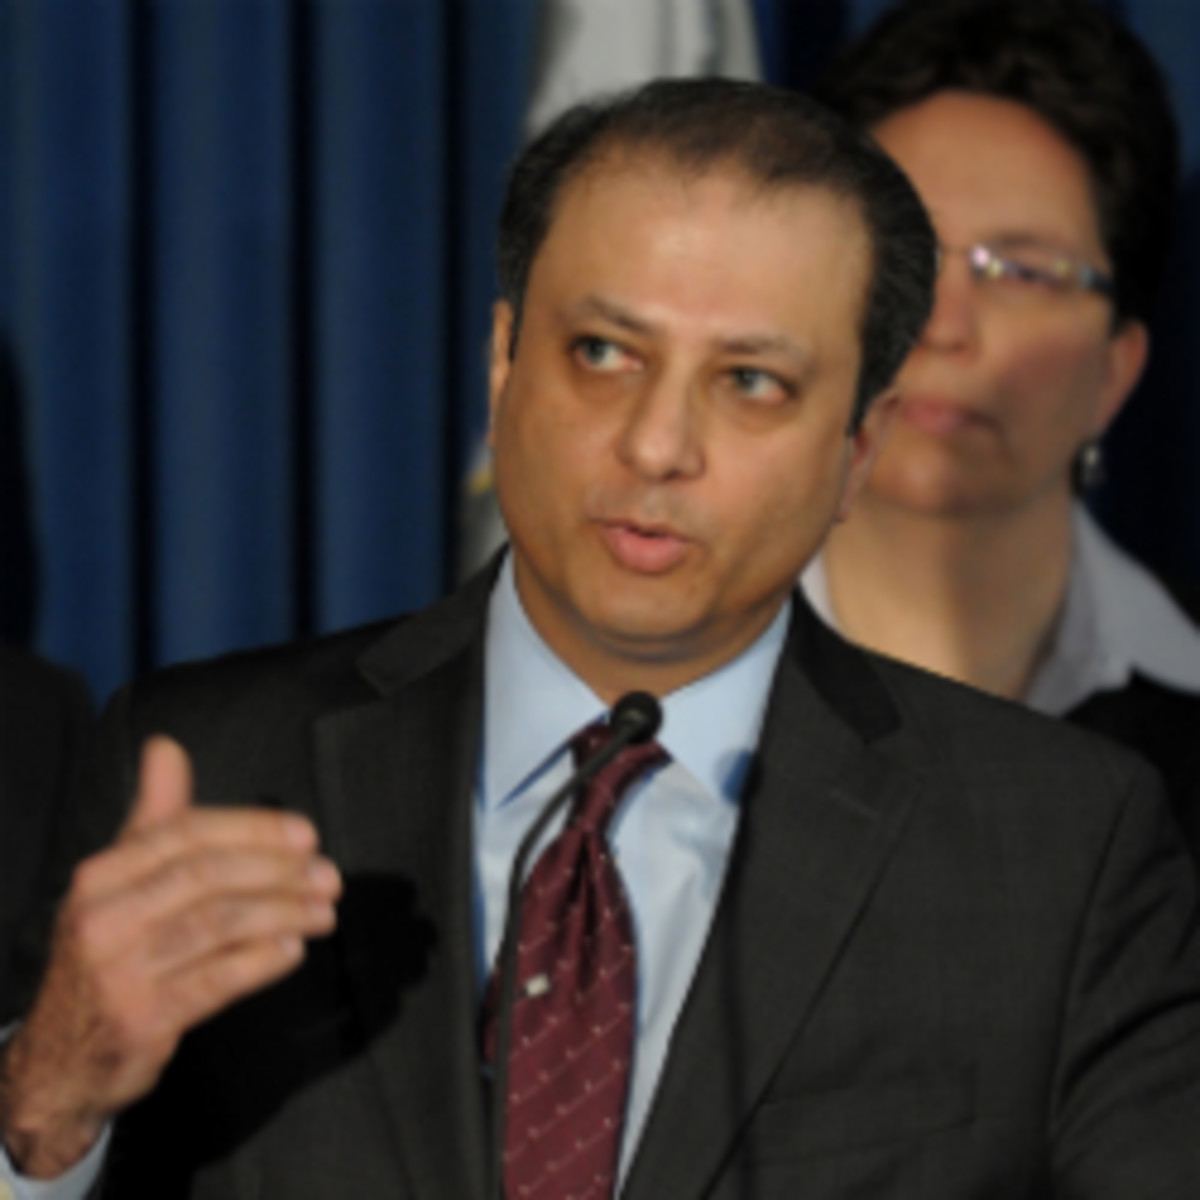 Manhattan U.S. Attorney Preet Bharara announced the founder of a company that advised the NBPA had been charged with attempting to defraud the union. (Stan Honda/AFP/Getty)